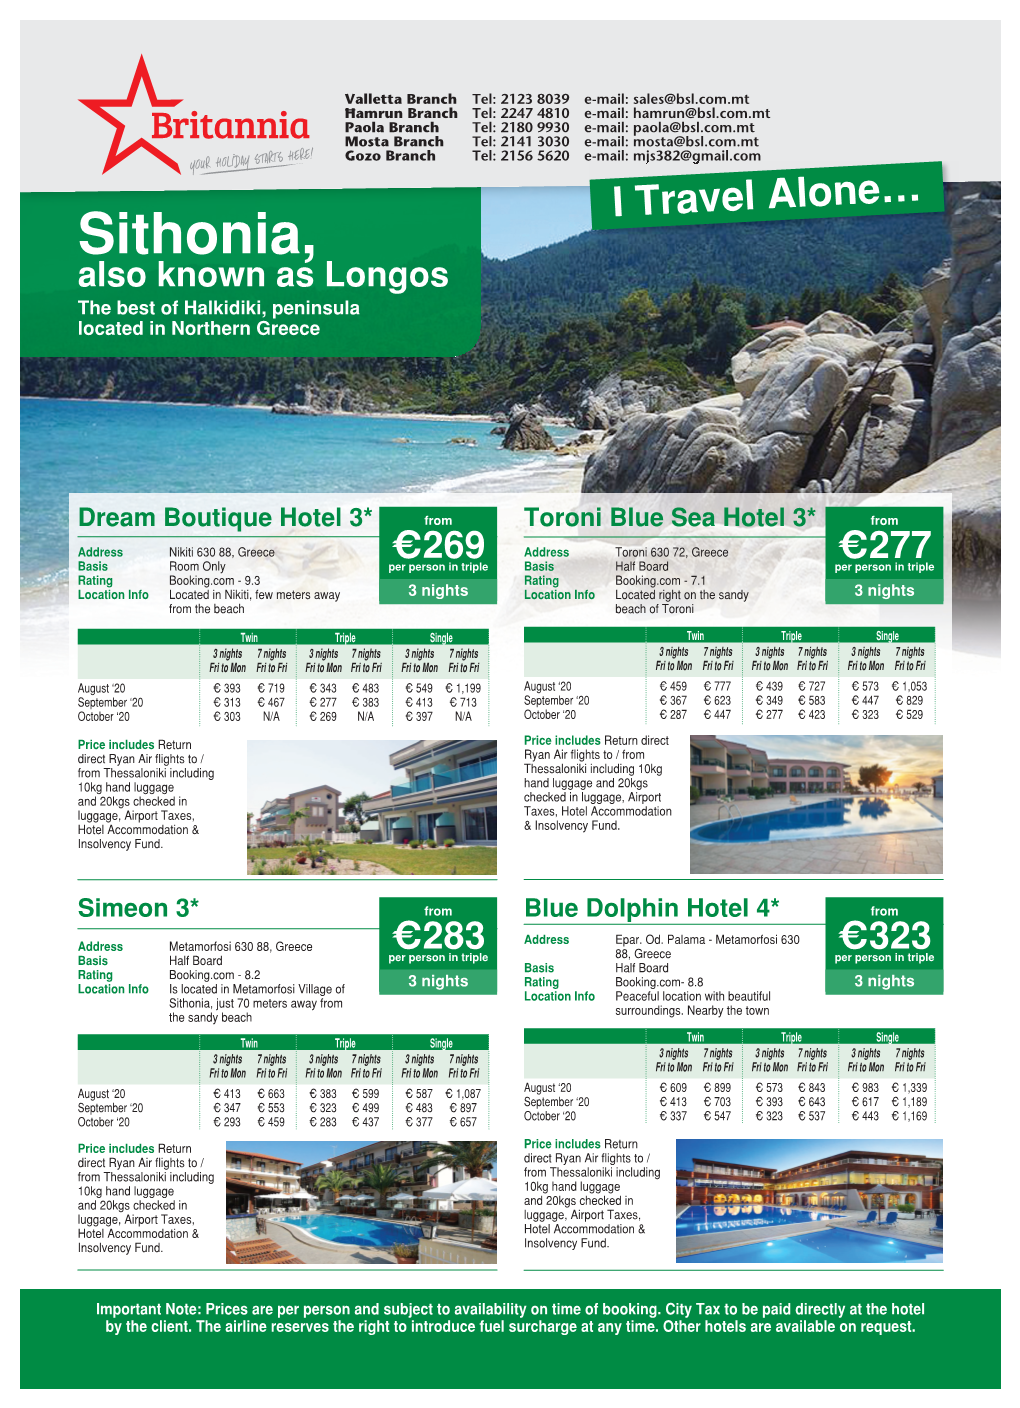 Sithonia, Also Known As Longos the Best of Halkidiki, Peninsula Located in Northern Greece